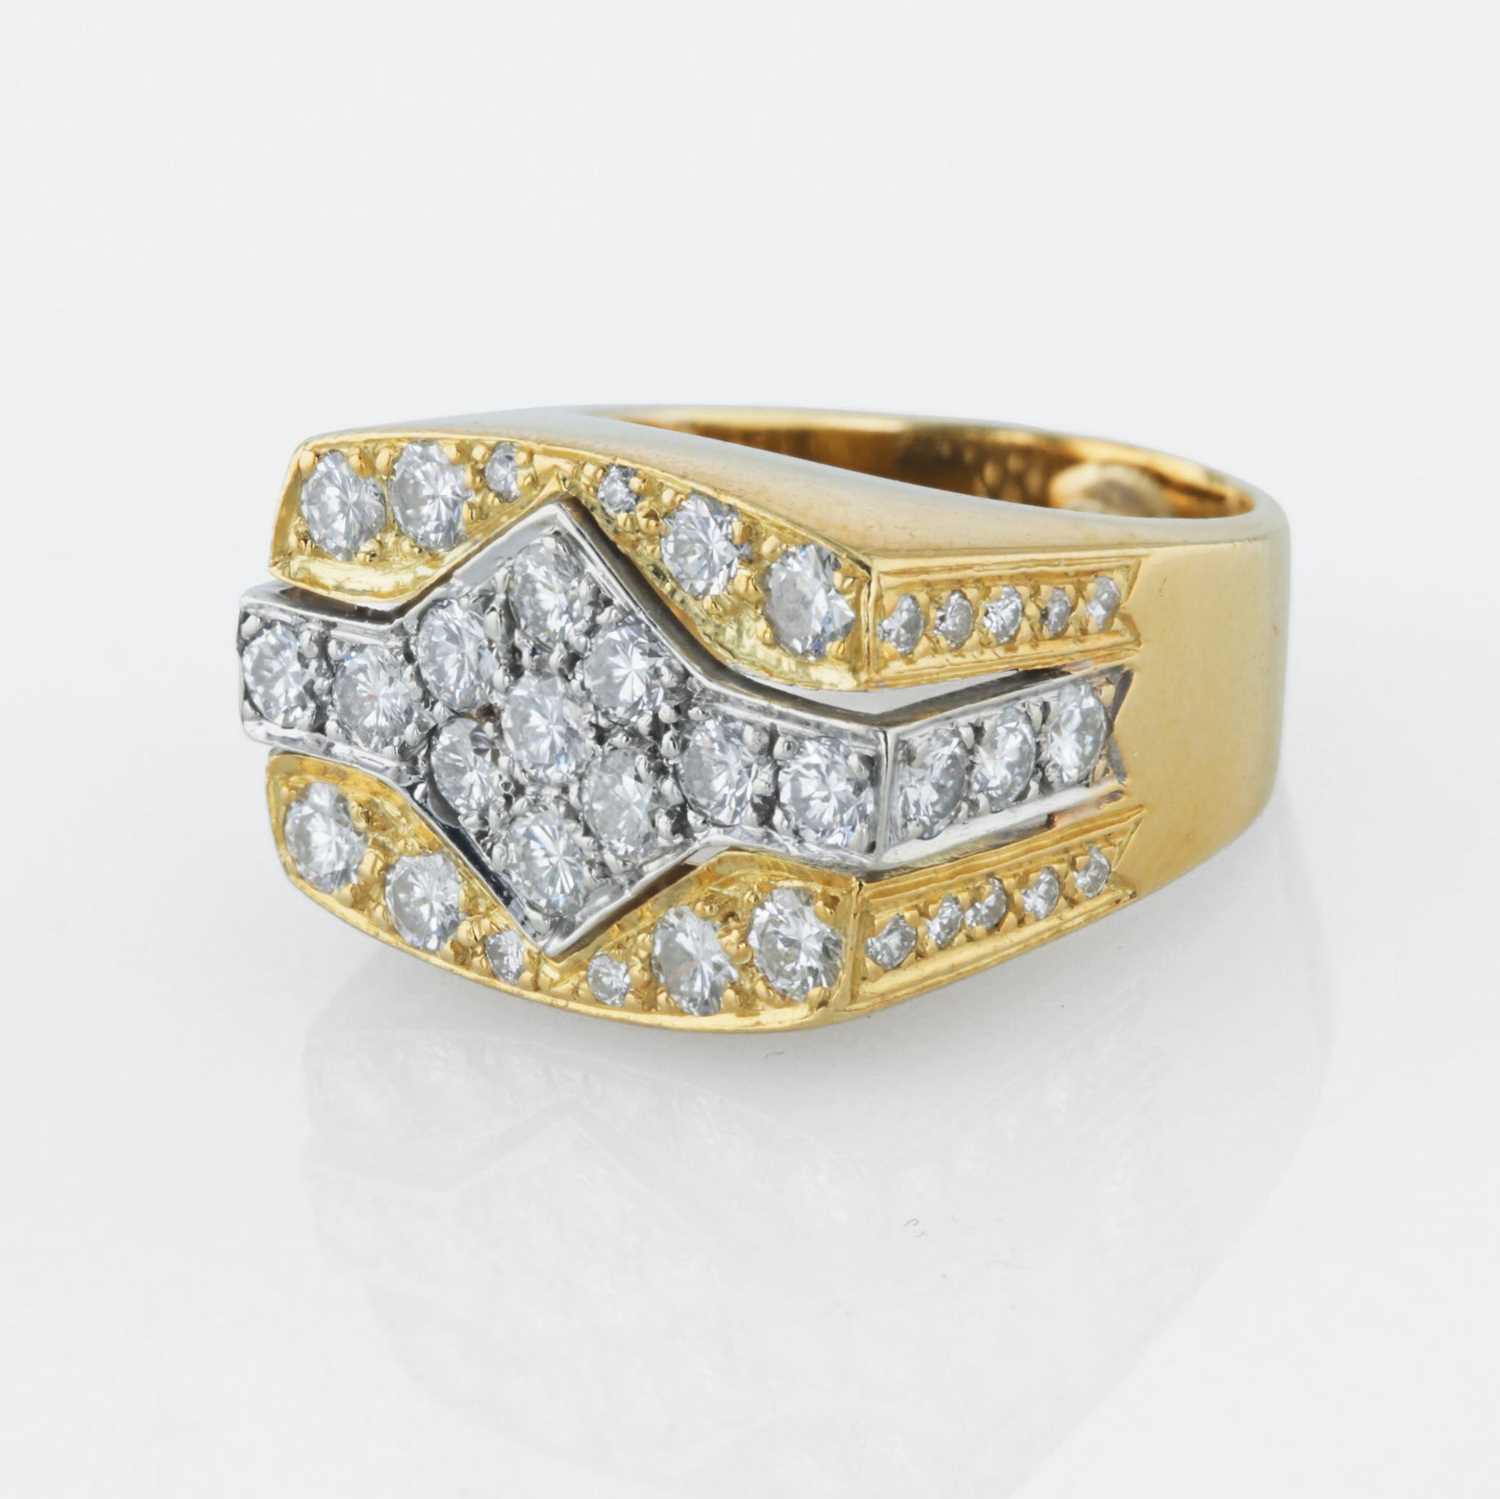 Lot 19 - An 18K bicolor gold and diamond ring